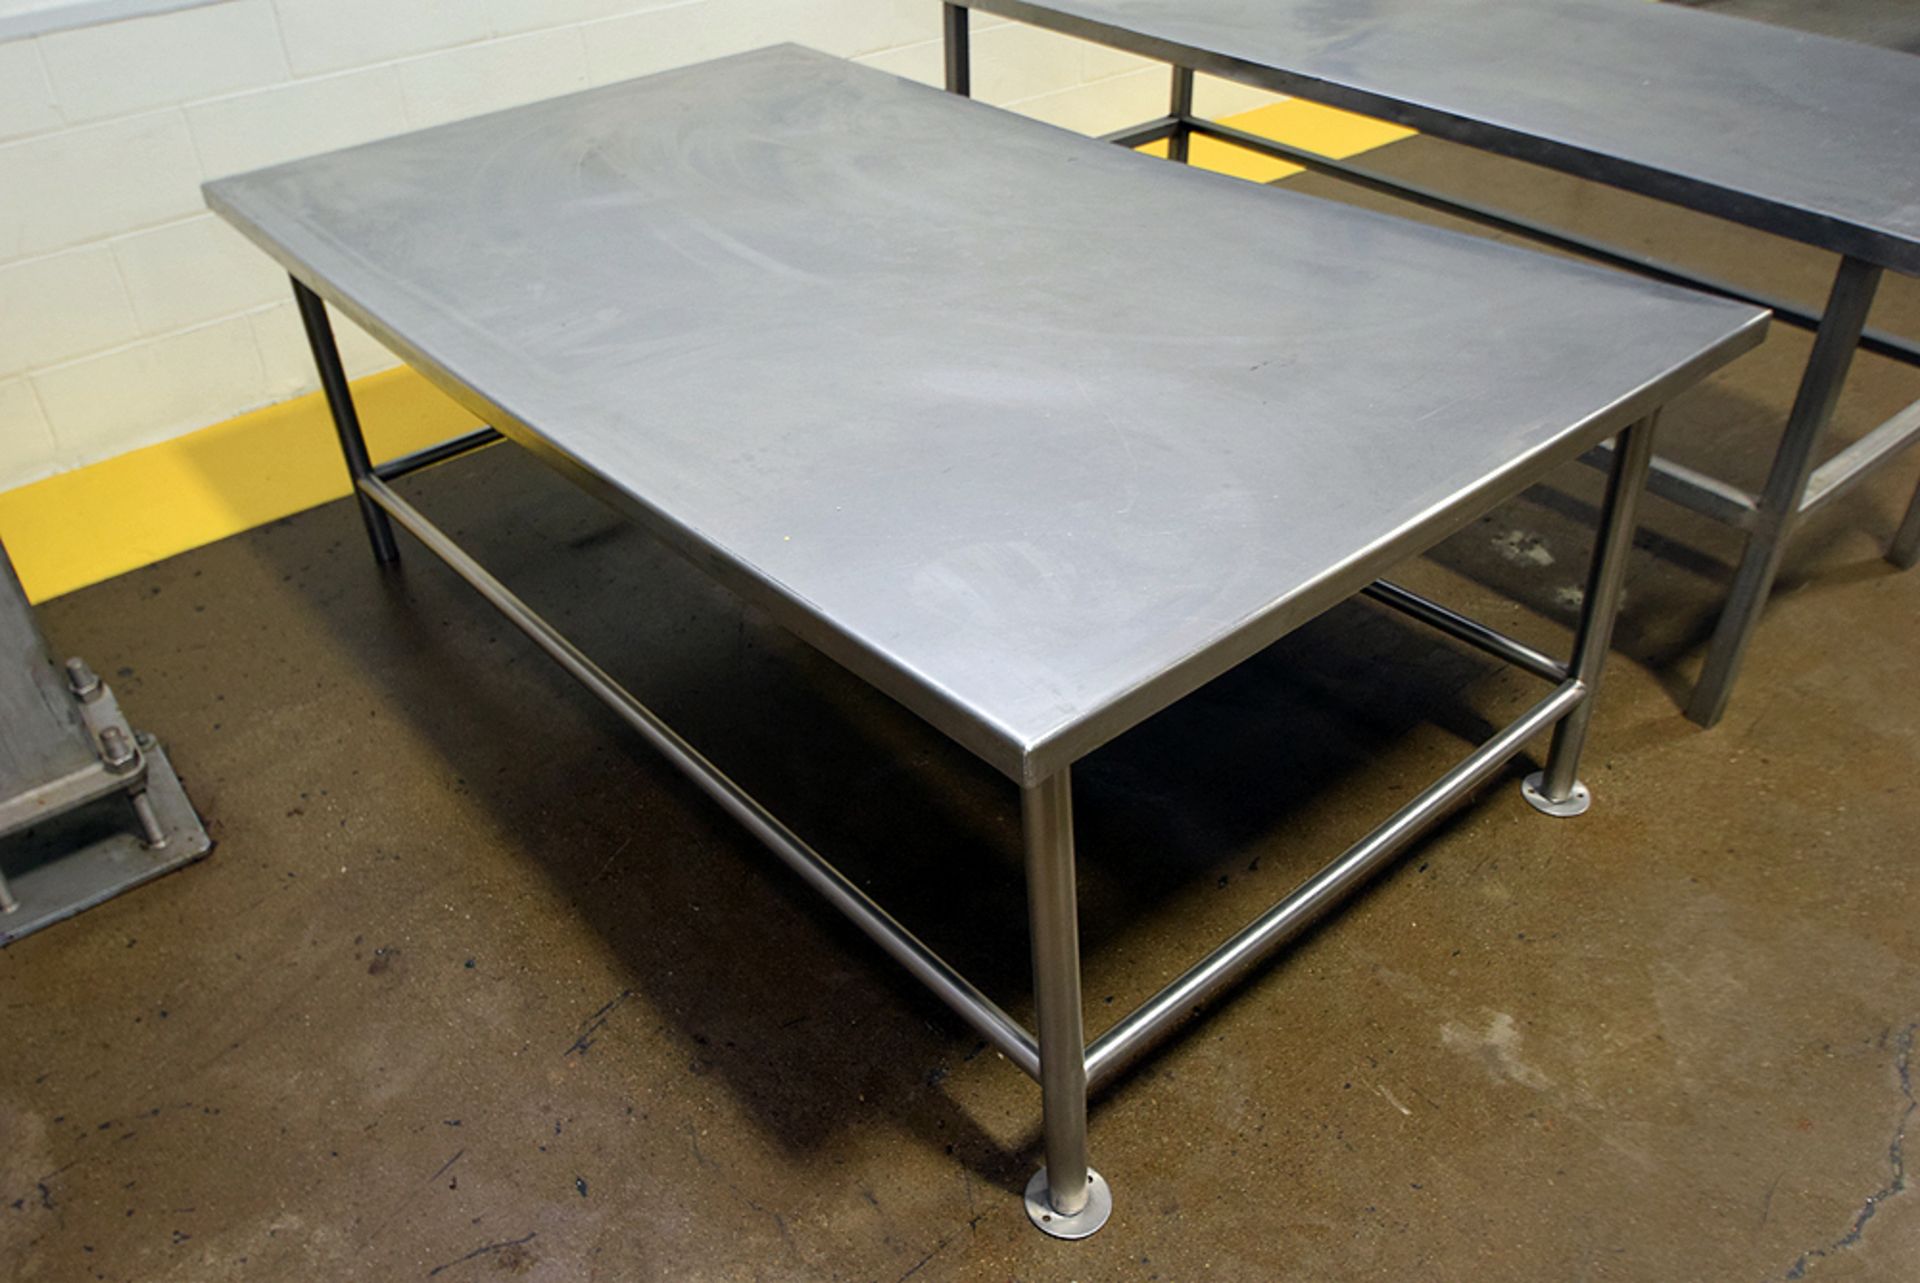 43" x 72" x 28" Tall Stainless Steel Work Table